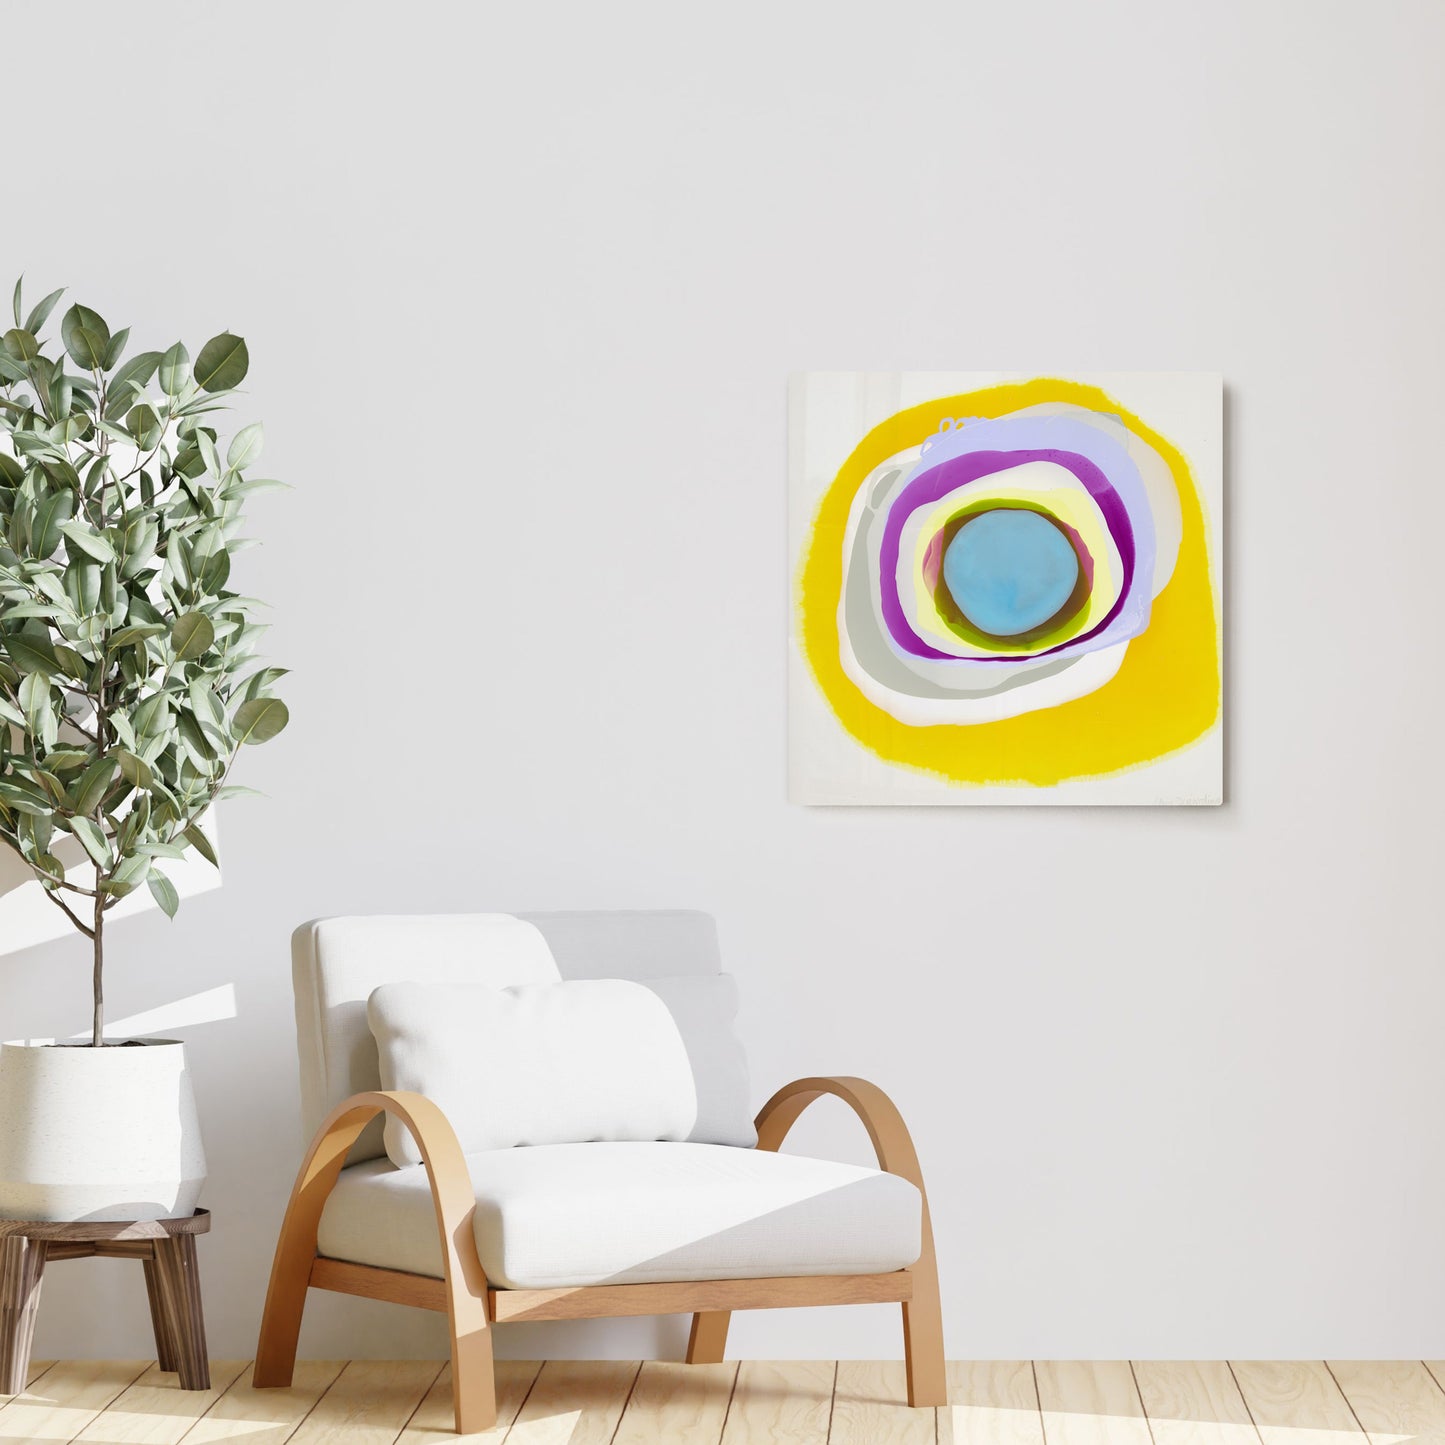 Claire Desjardins' Tranquil painting reproduced on HD metal print and displayed on wall